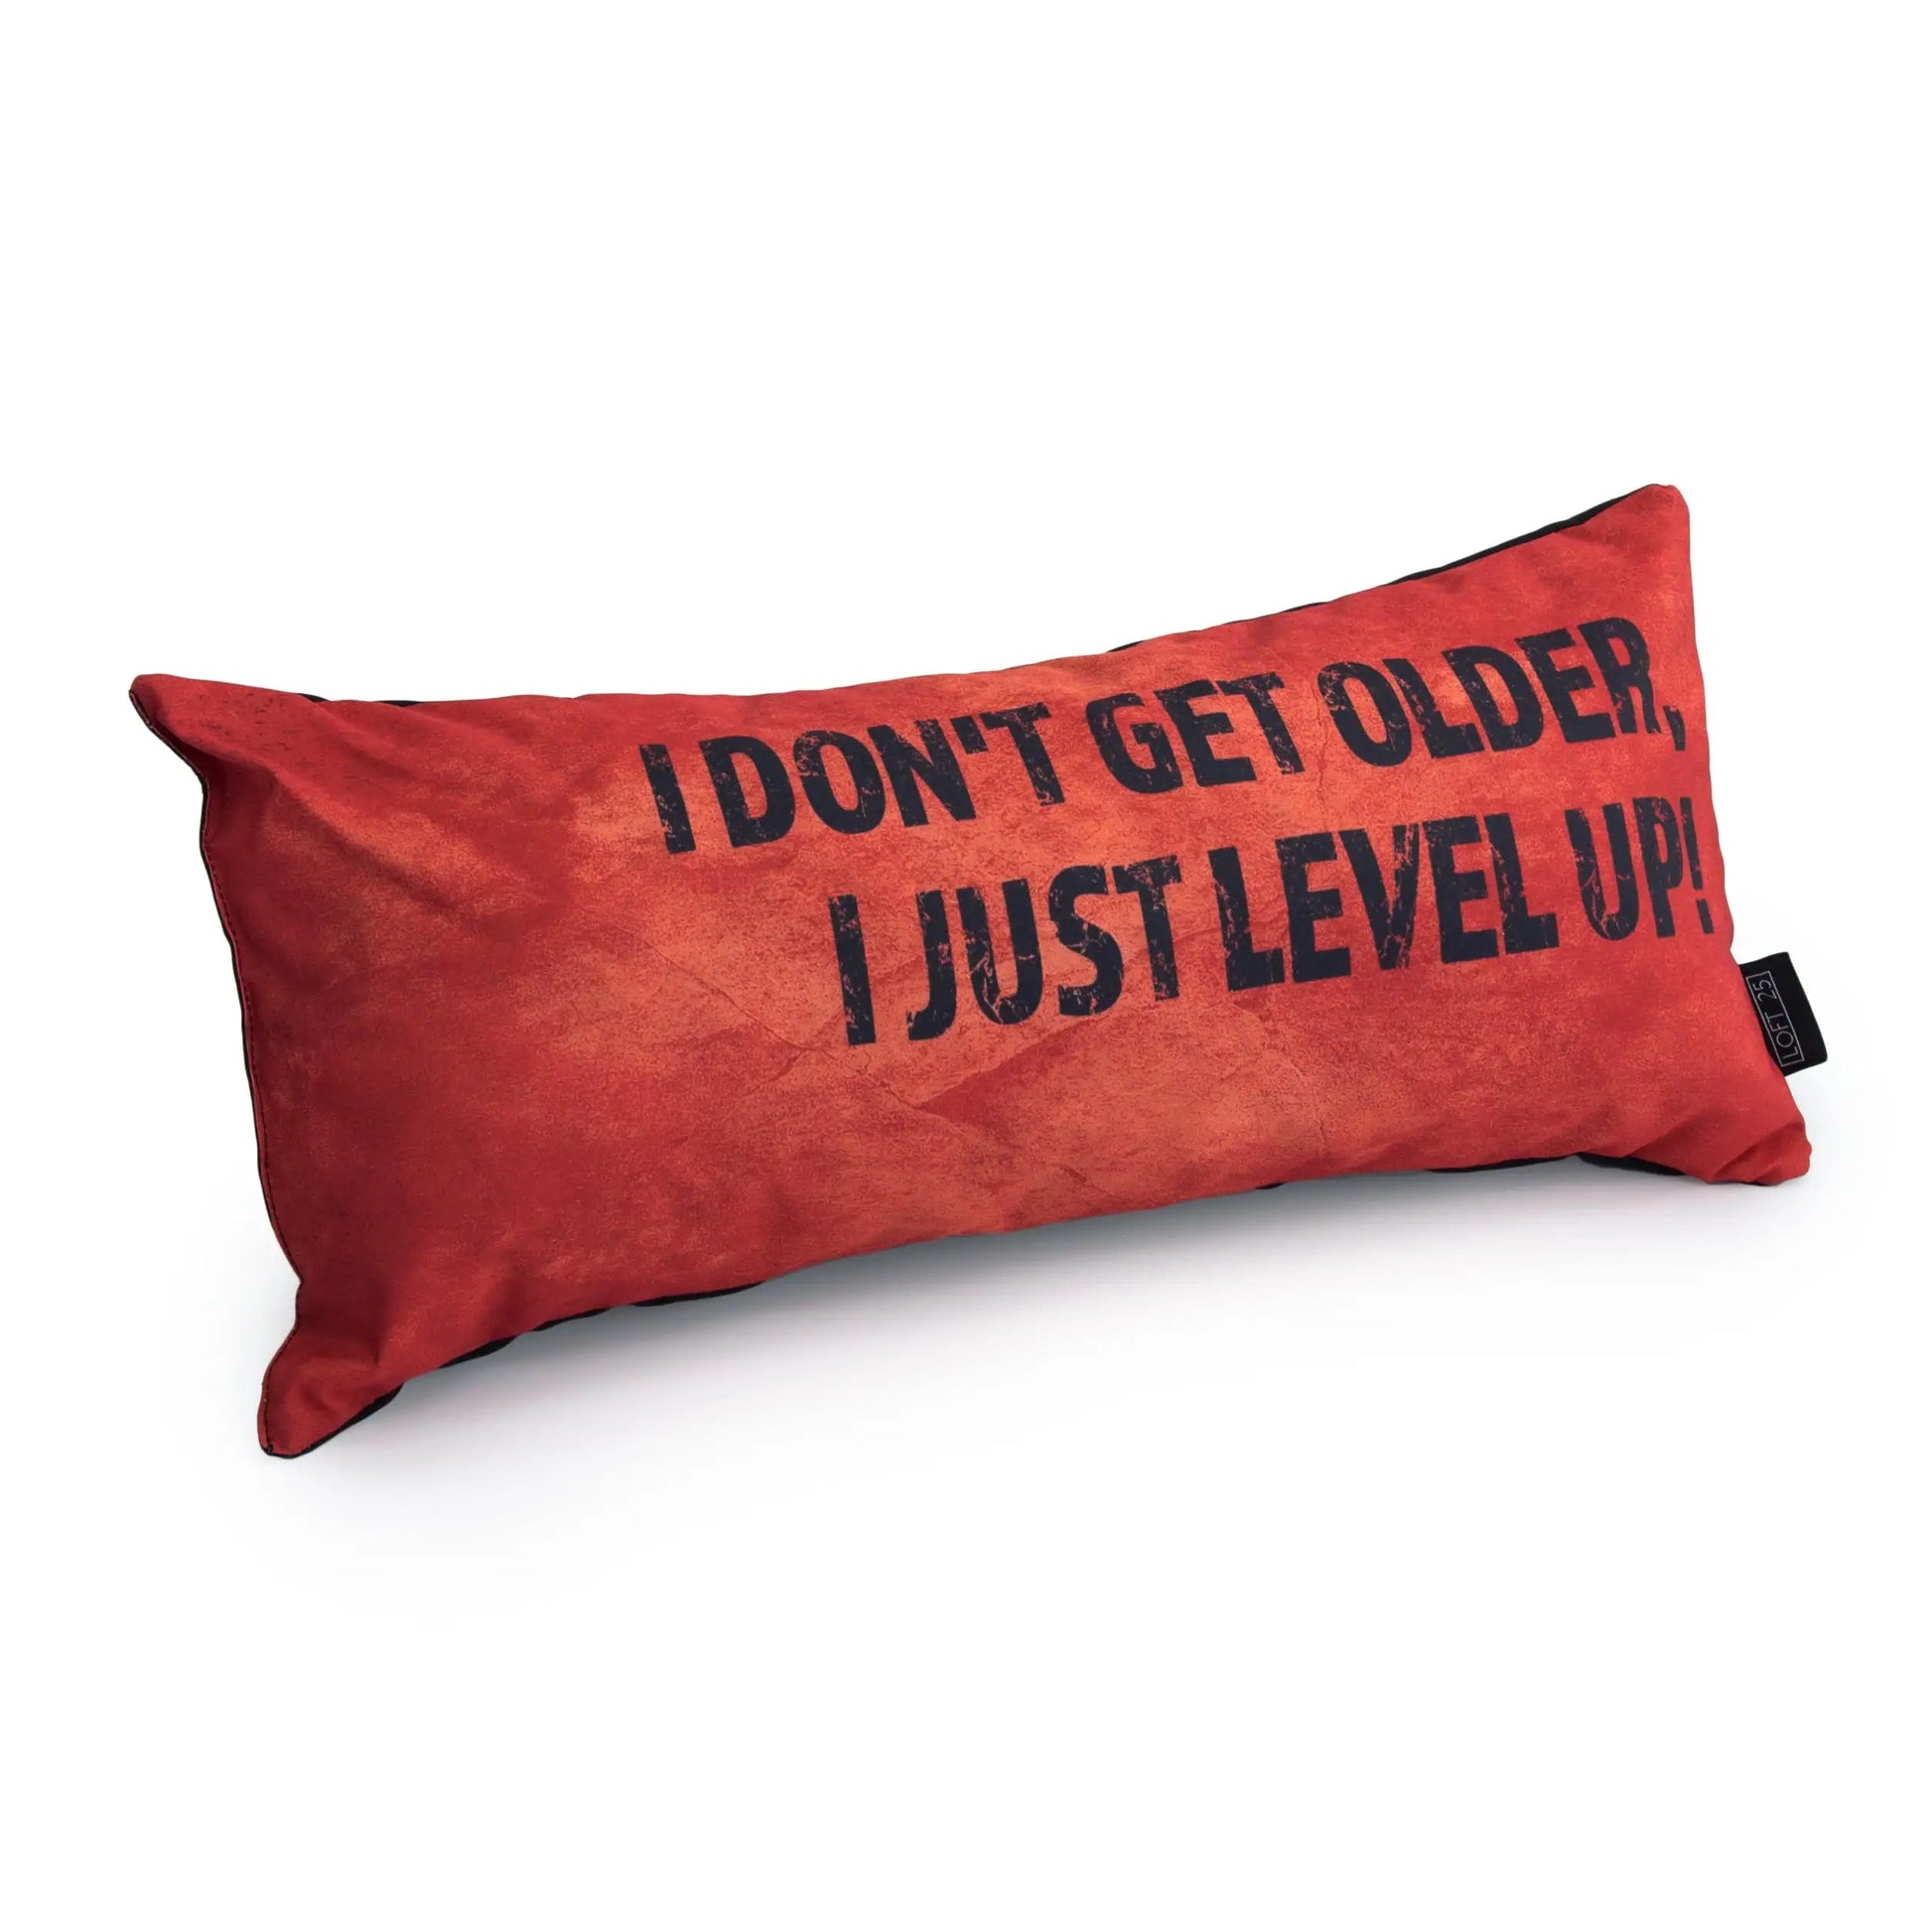  A orange pillow with white text that says "I don't get older, I just level up."